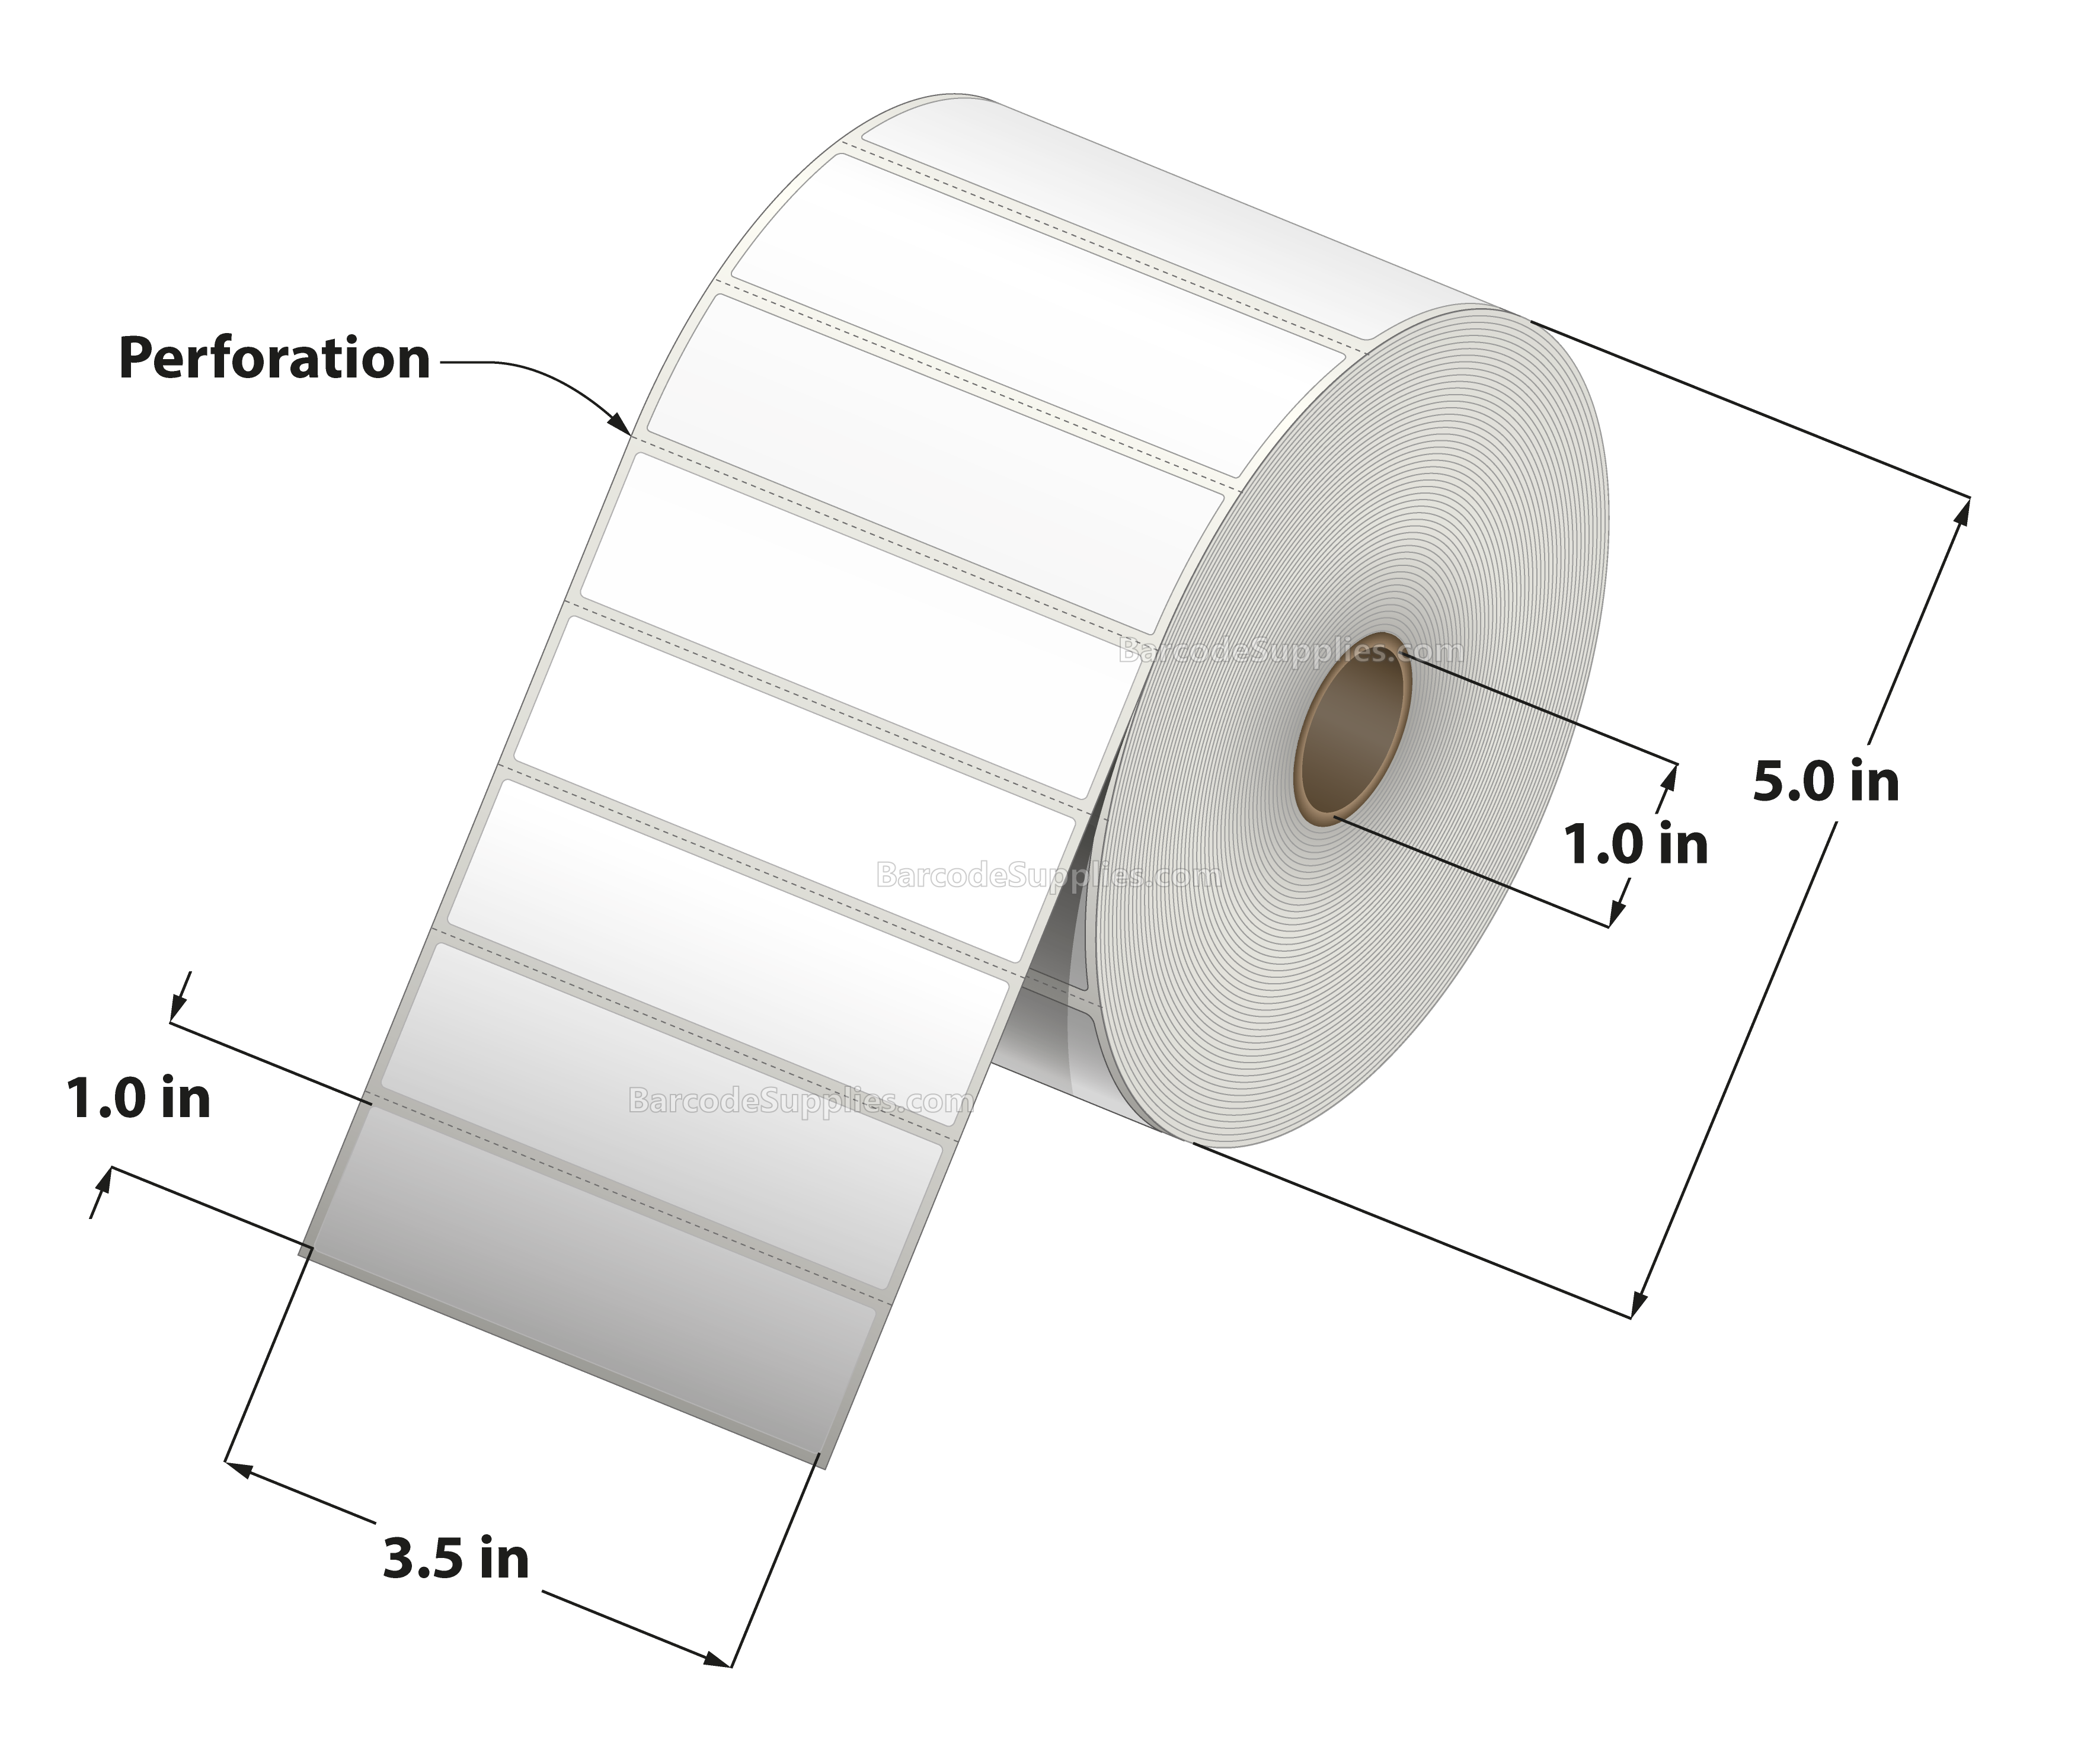 3.5 x 1 Direct Thermal White Labels With Acrylic Adhesive - Perforated - 2500 Labels Per Roll - Carton Of 12 Rolls - 30000 Labels Total - MPN: RD-35-1-2500-1 - BarcodeSource, Inc.